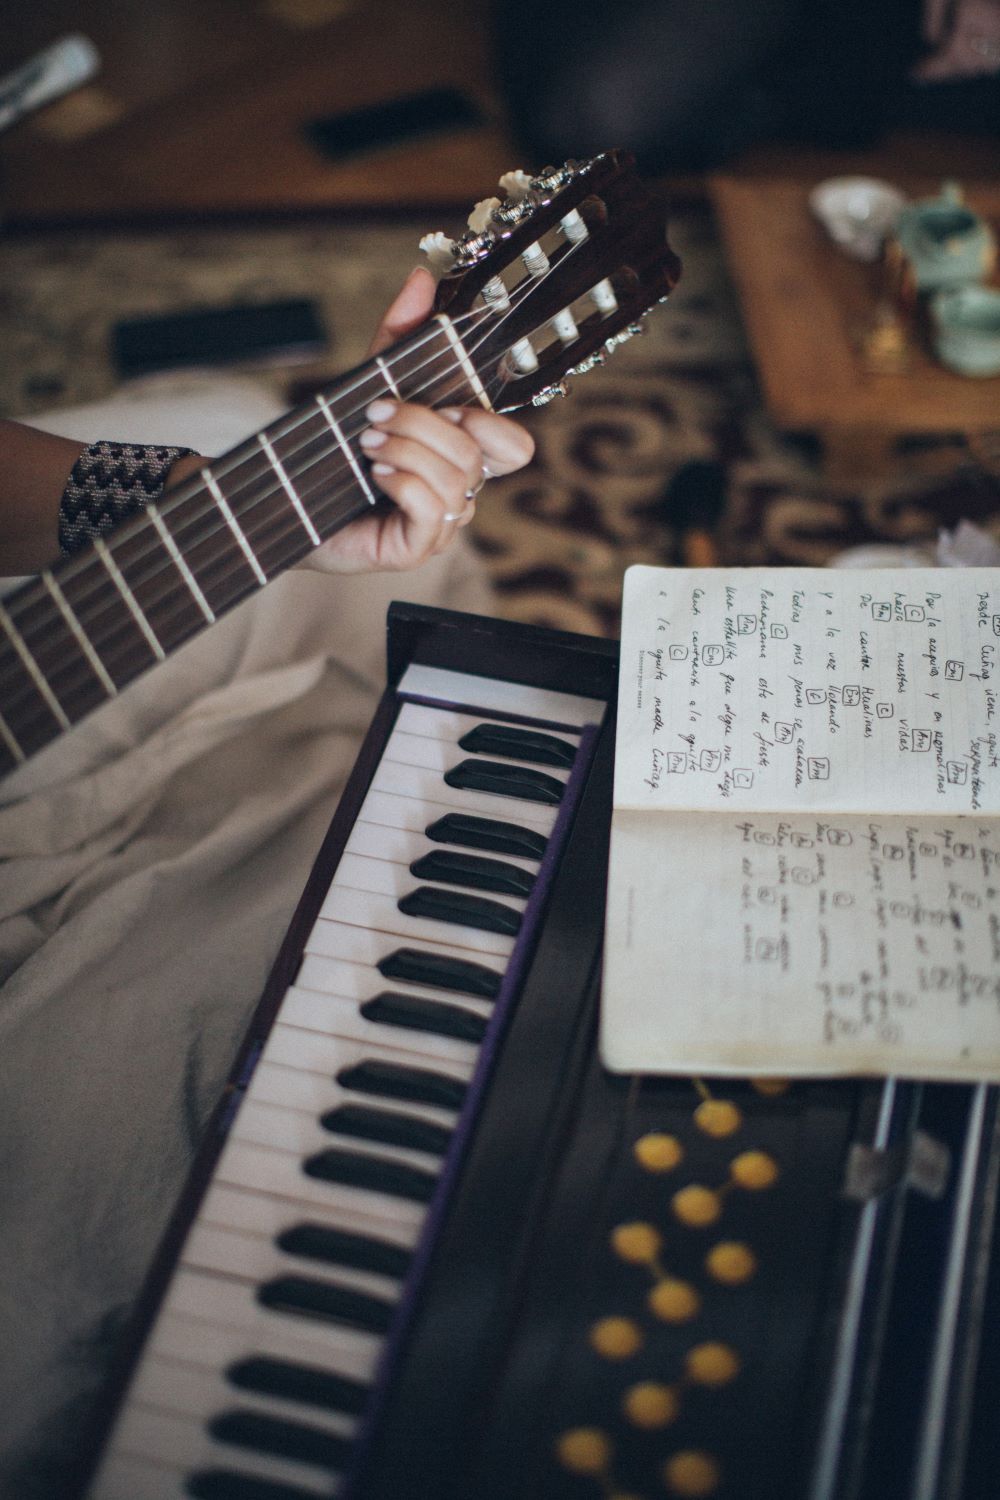 Guitar and keyboard, Photo by Elina Sazonova: https://www.pexels.com/photo/person-playing-guitar-with-musical-notes-3971985/